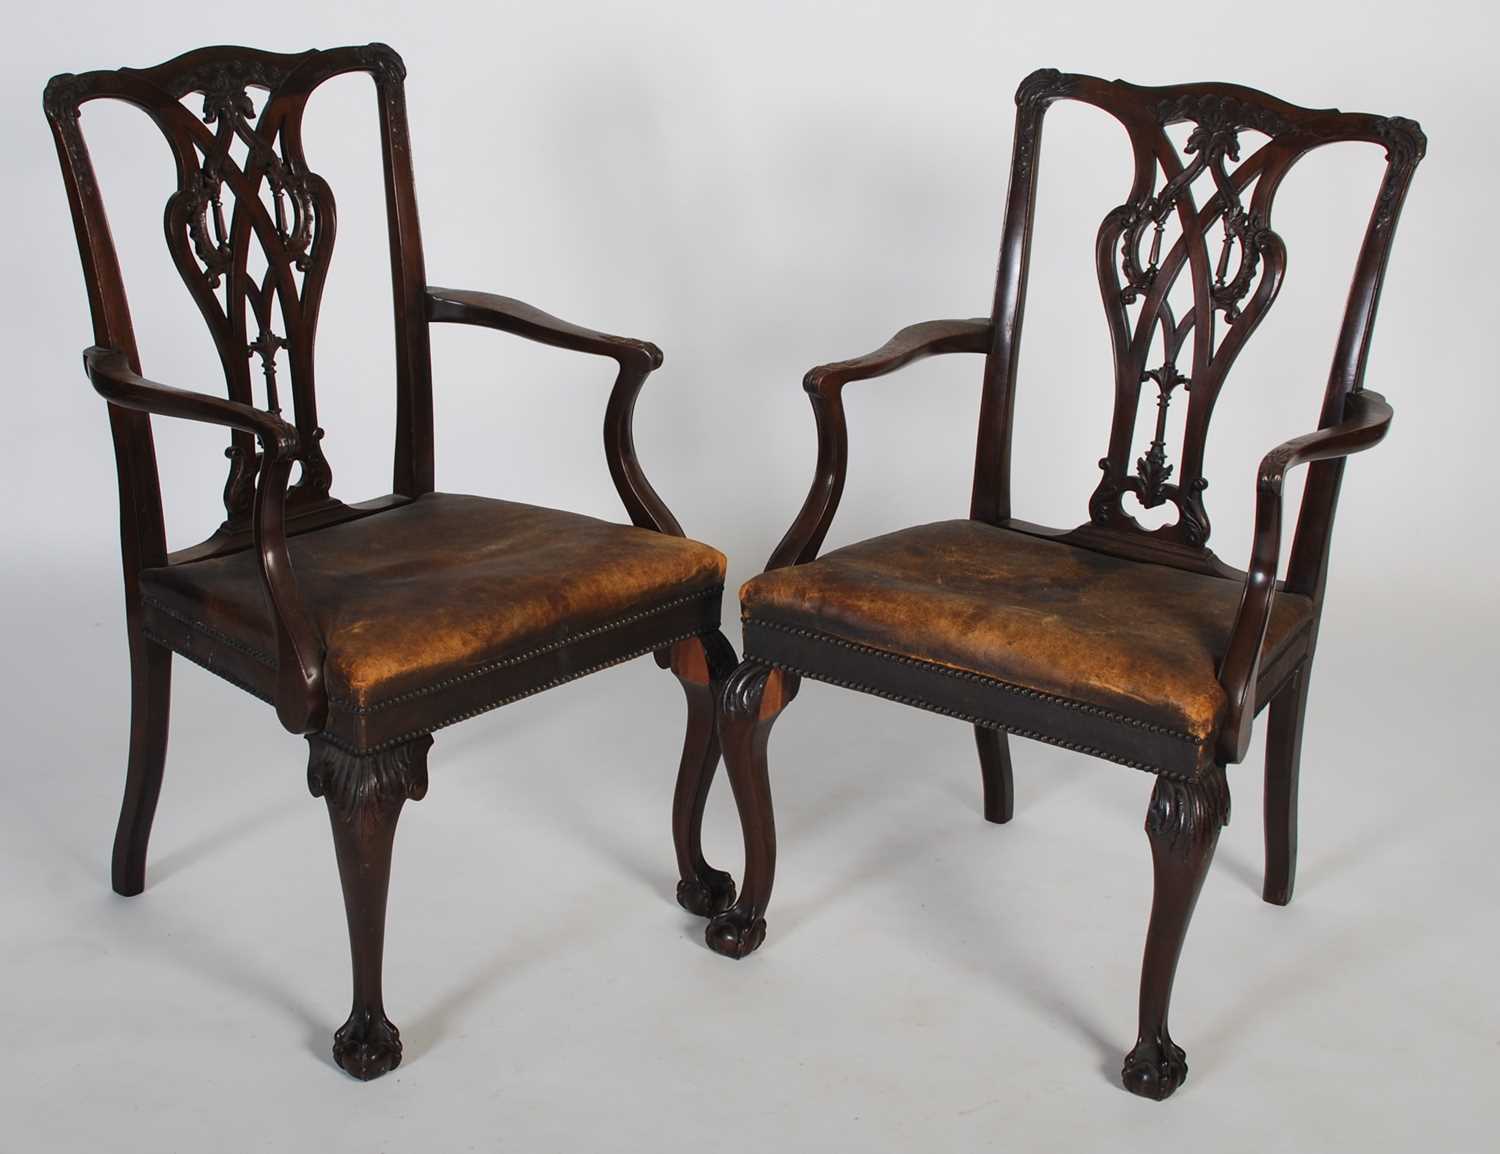 A pair of early 20th century George III style elbow chairs, the shaped top rail above a carved and